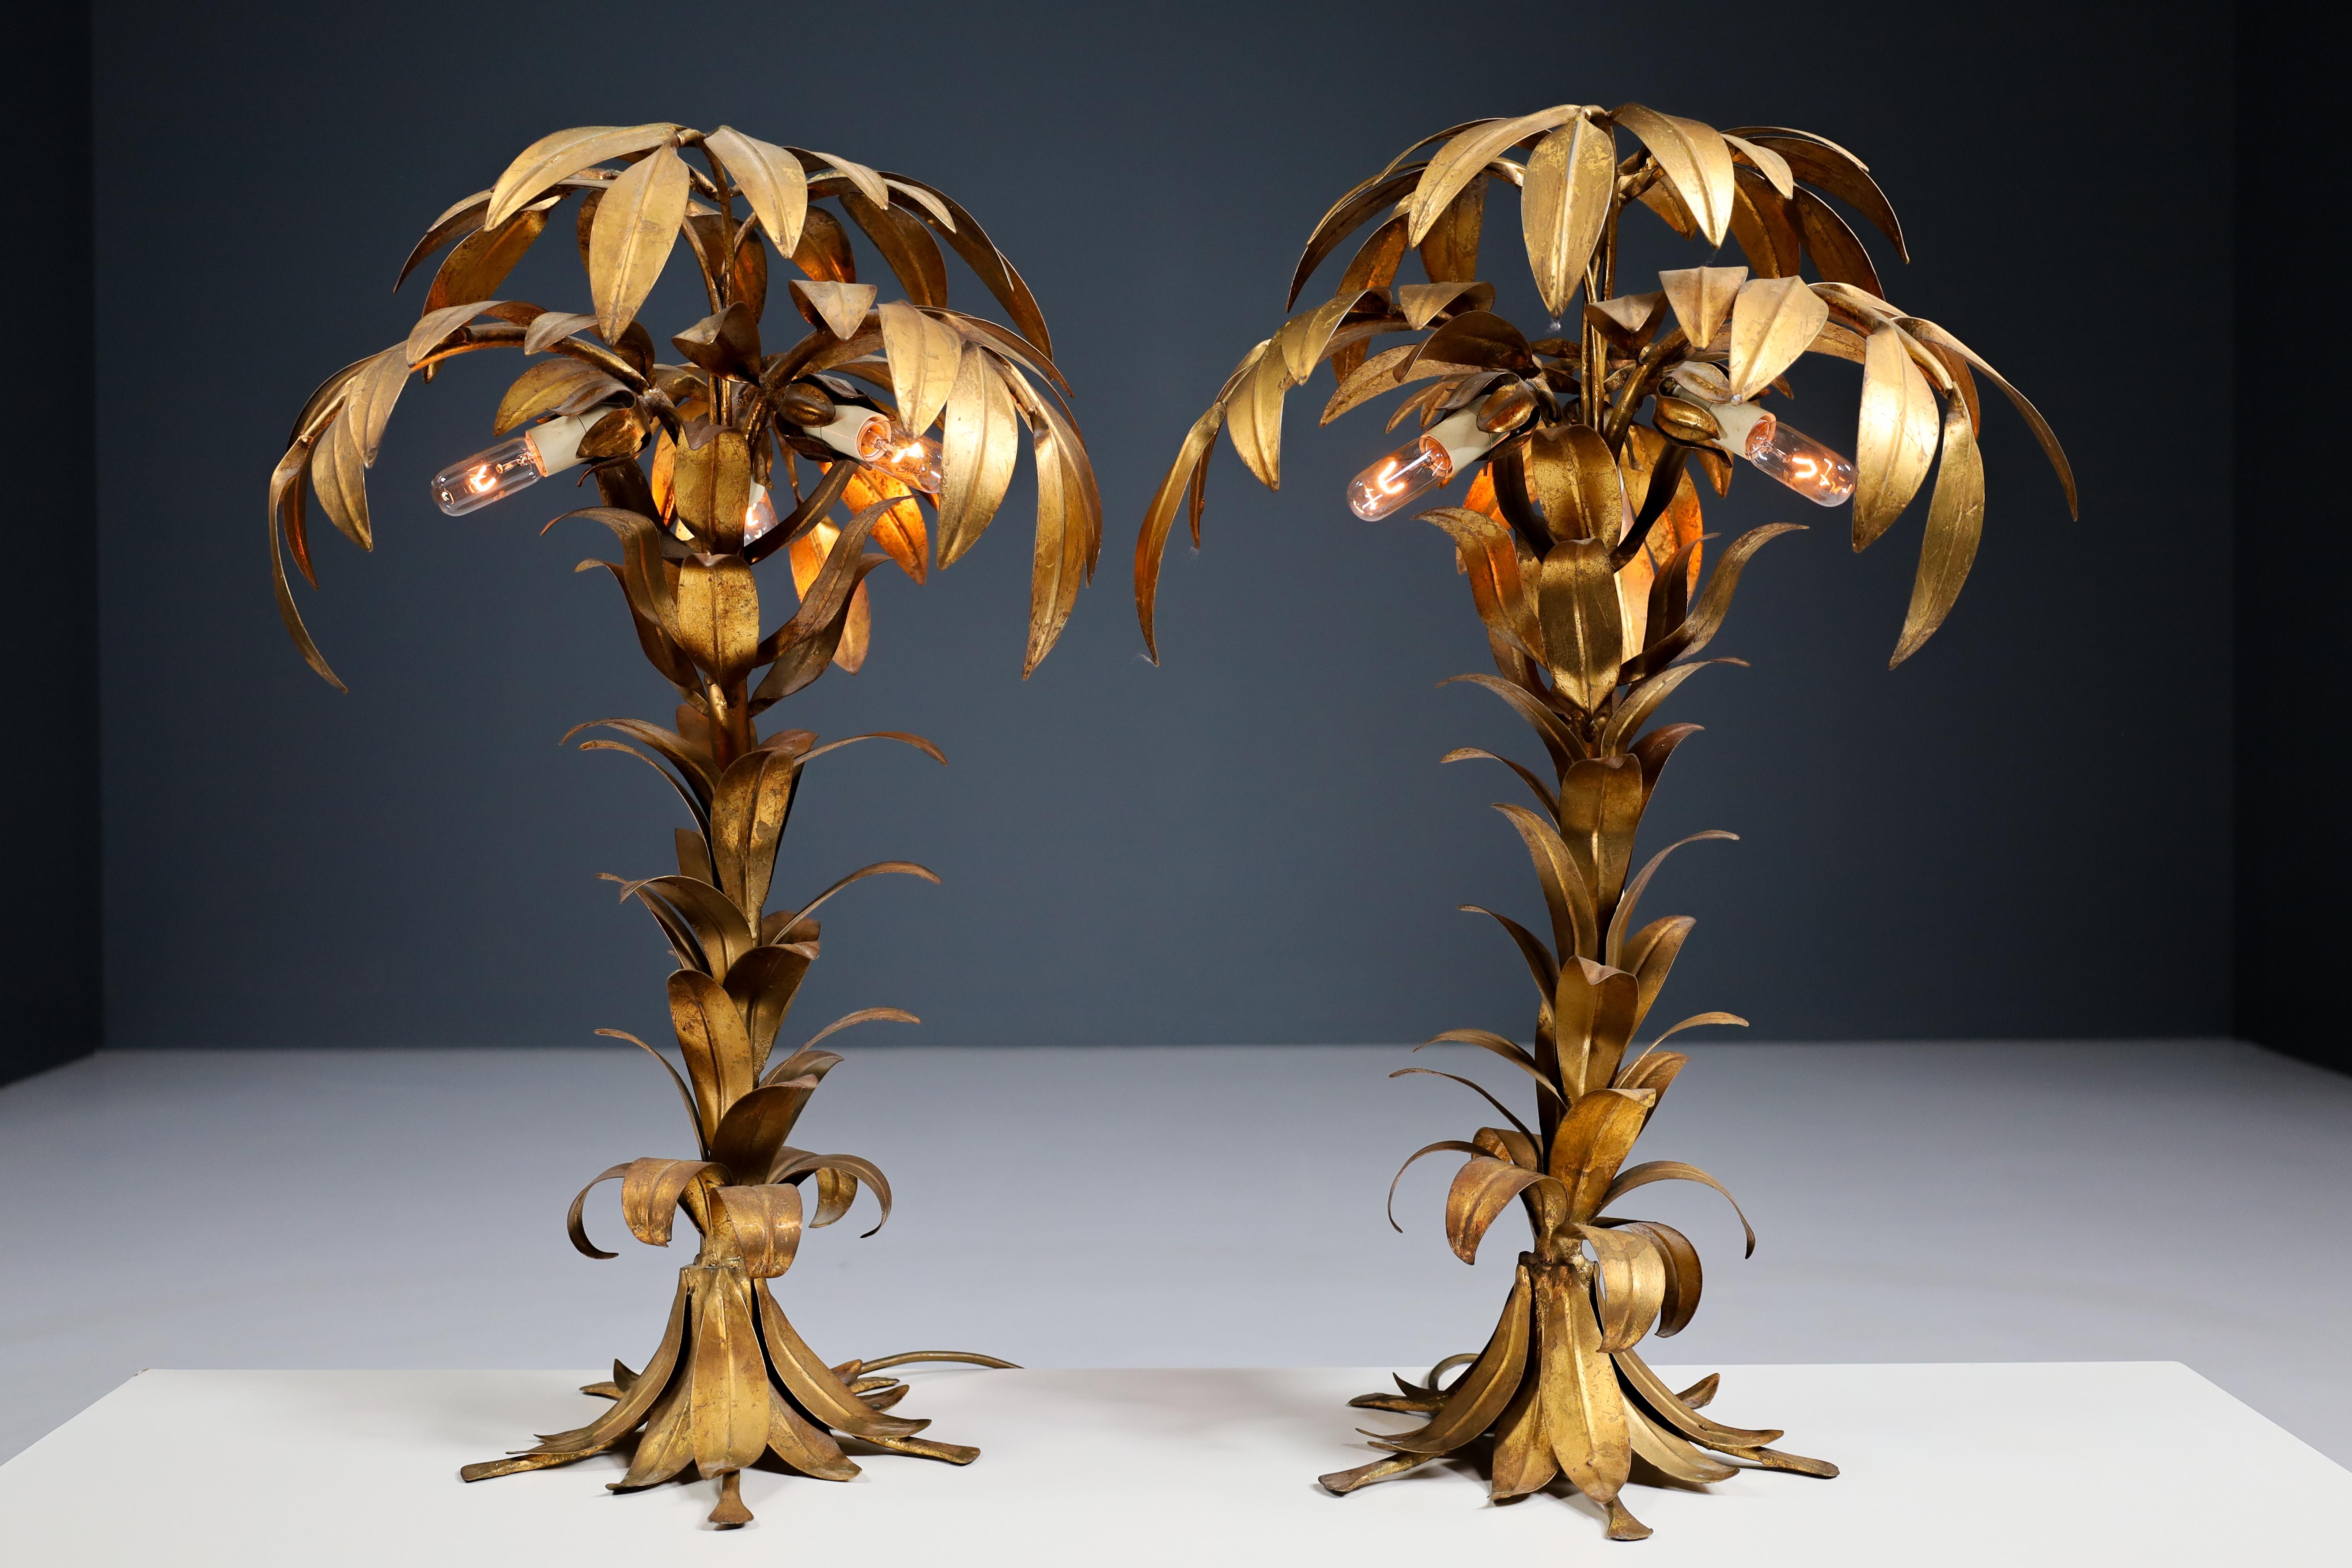 Pair of two Gilt Palm Tree Tables Lamp by Hans Kögl, Germay 1970s For Sale 2